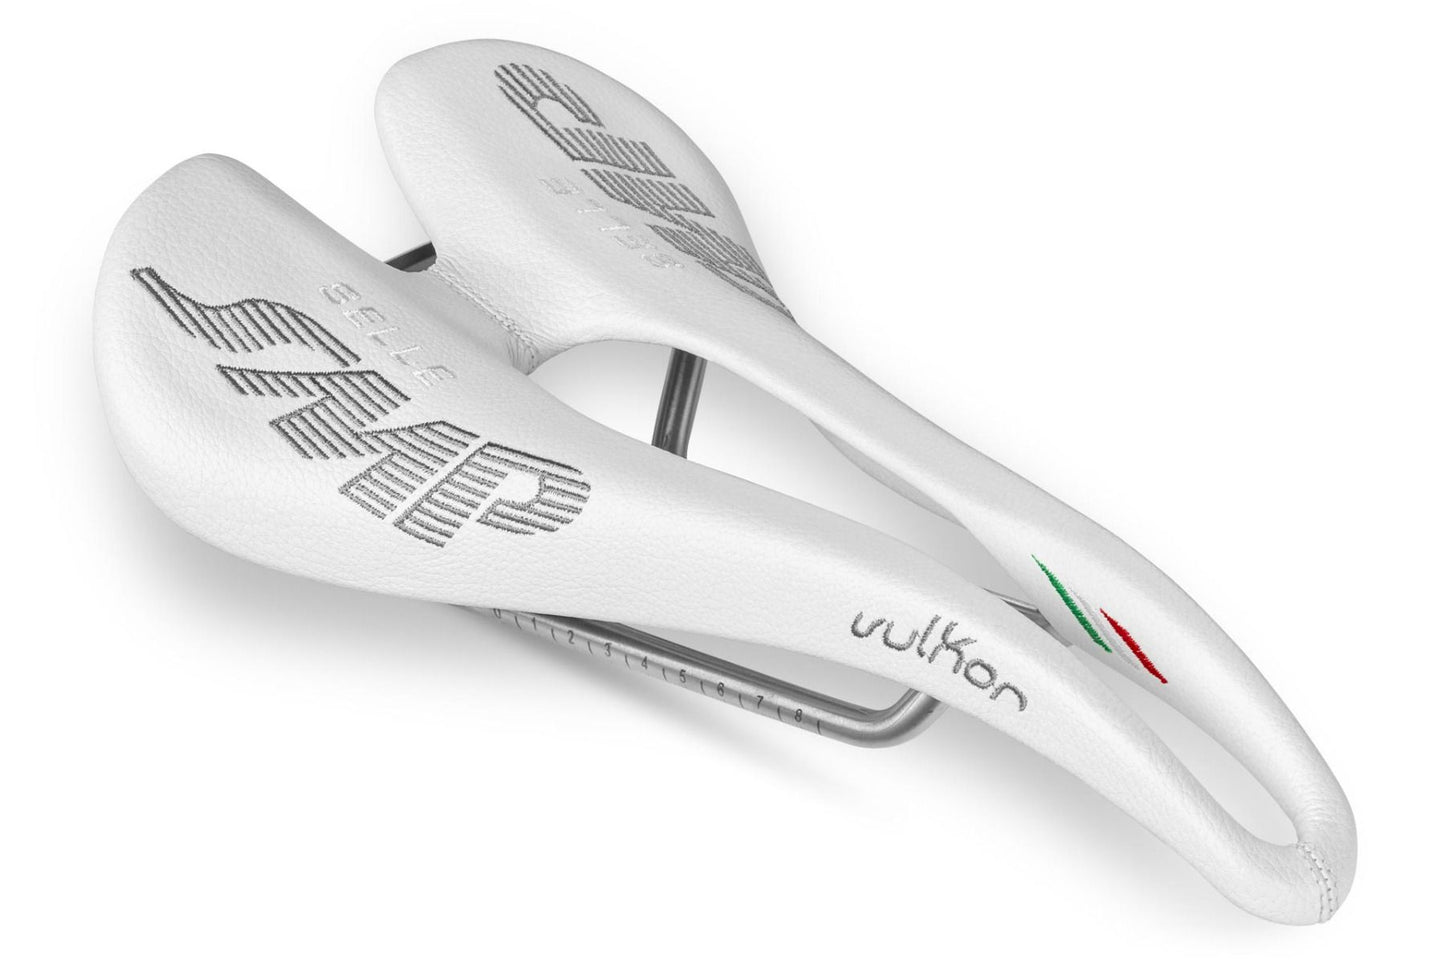 Selle SMP Vulkor Saddle with Carbon Rails (White)